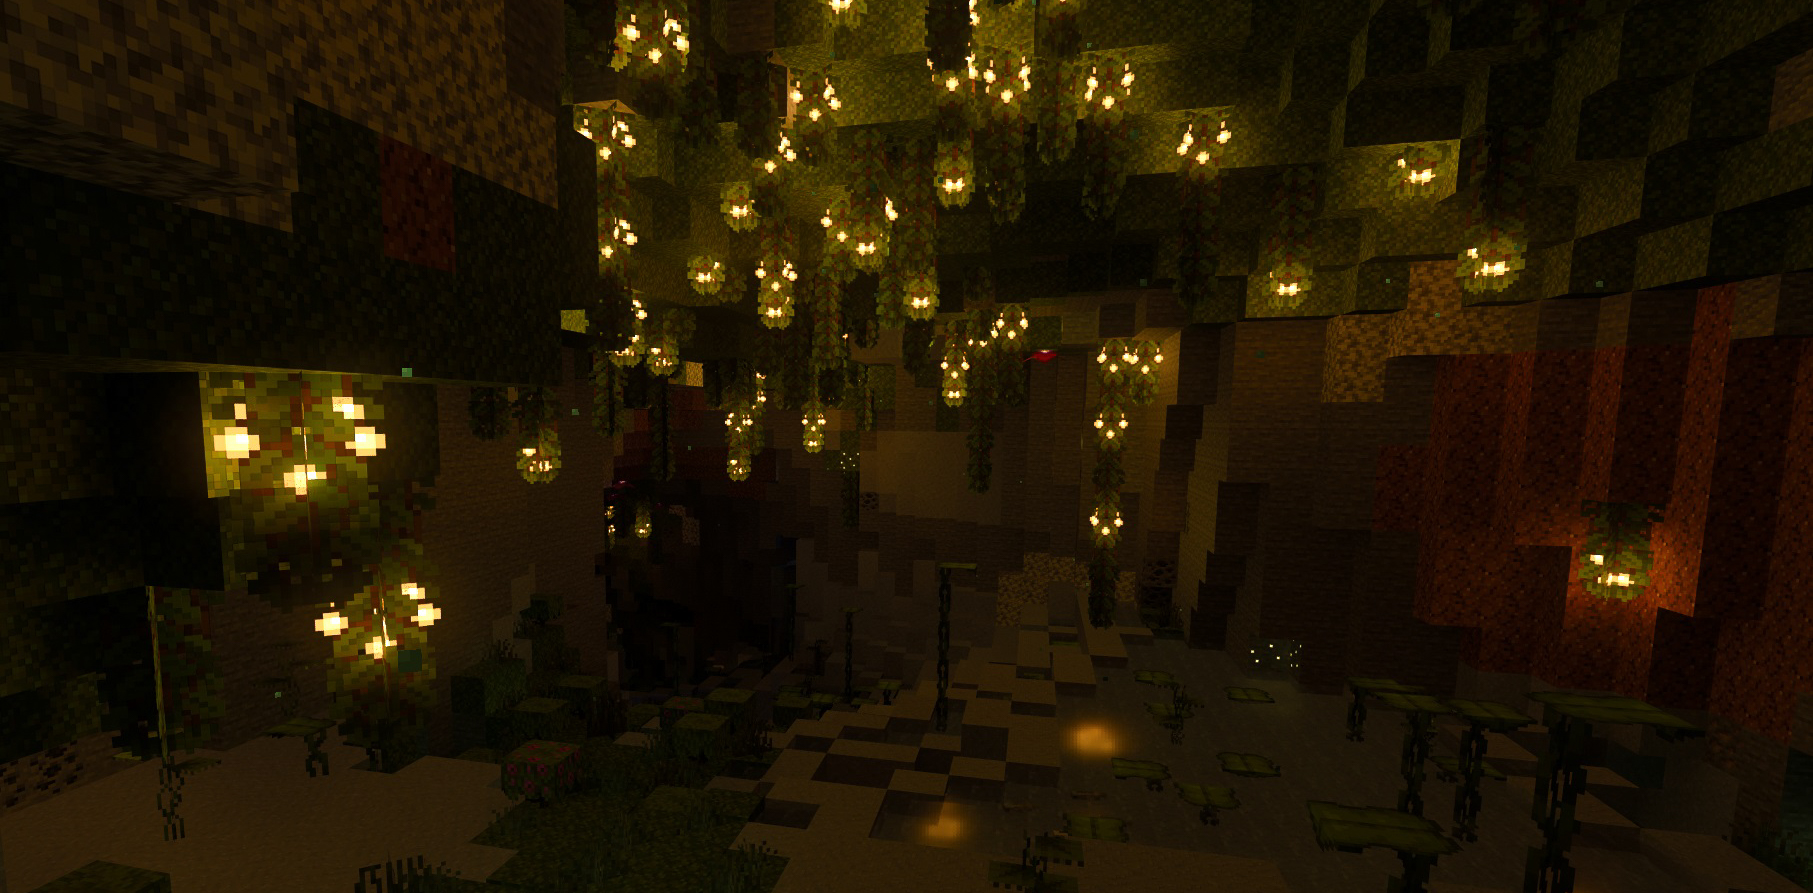 Glow berries hang from the ceiling in a Lush Cave biome